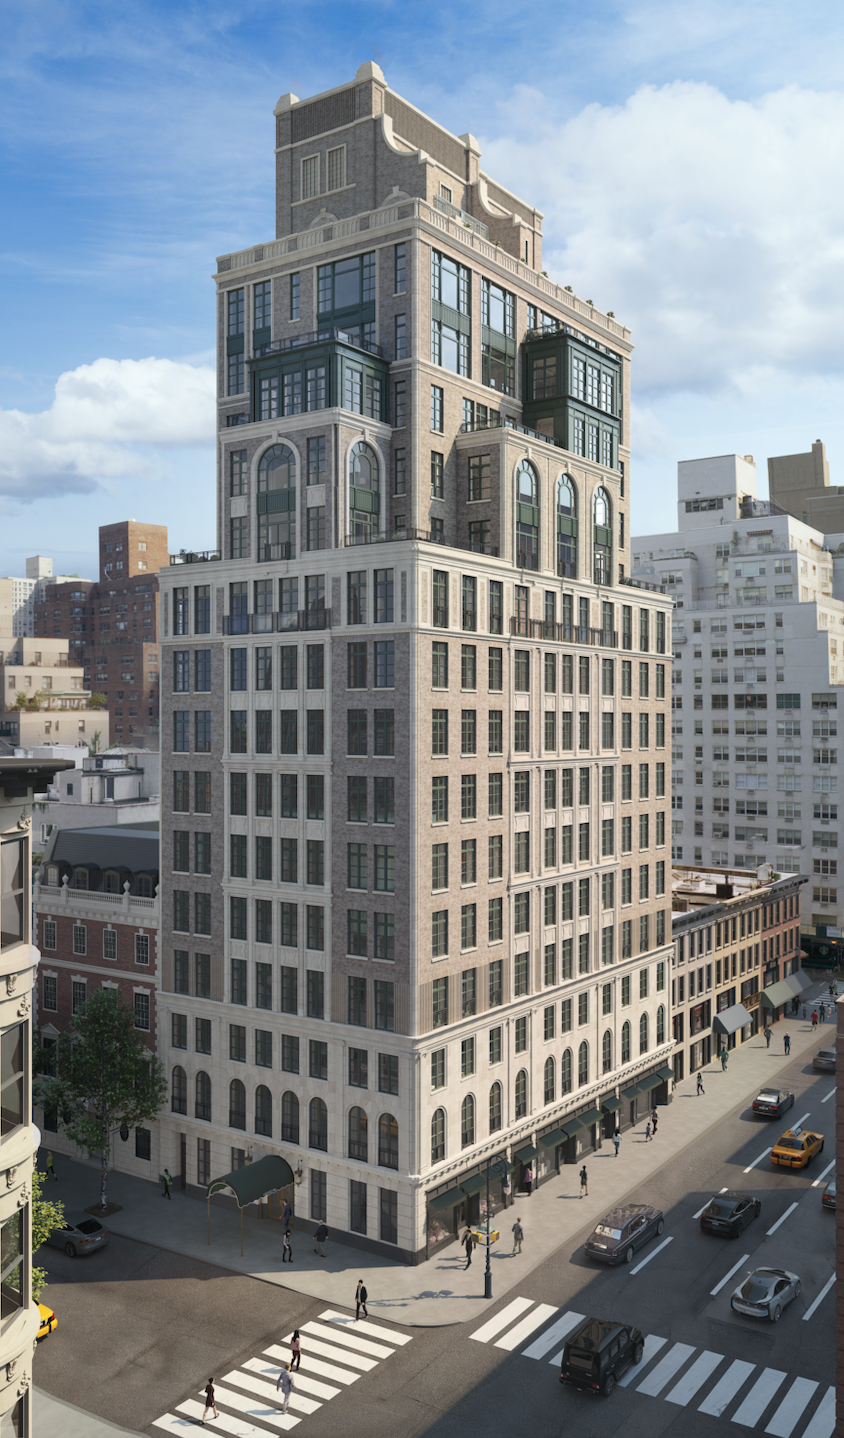 Nordstrom unveils rendering of NYC flagship store